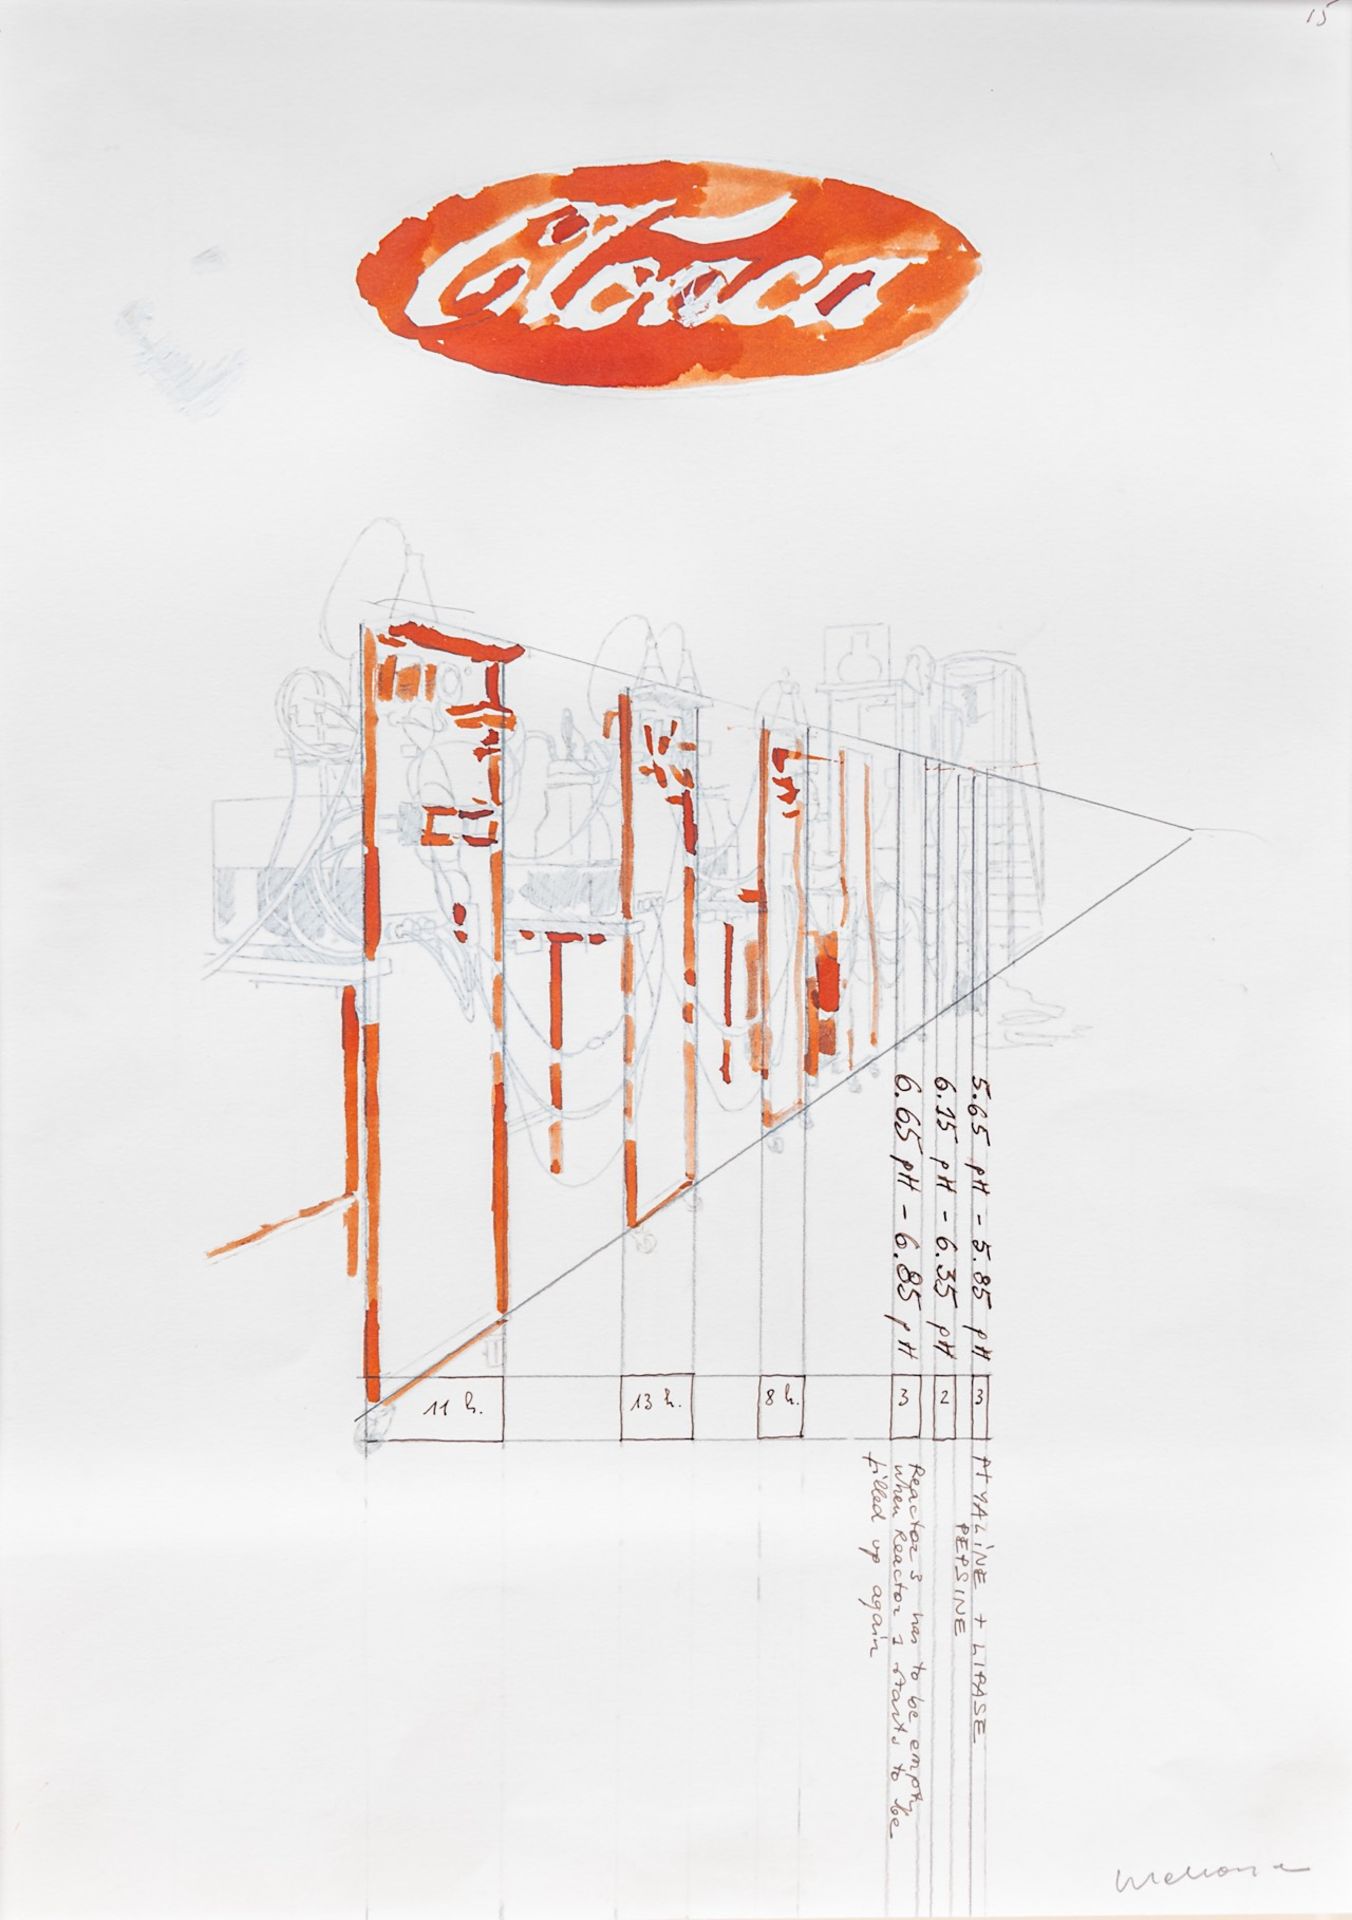 Wim Delvoye (1965), Cloaca, ink and watercolour drawing 58 x 42 cm. (22.8 x 16.5 in.), Frame: 72 x 5